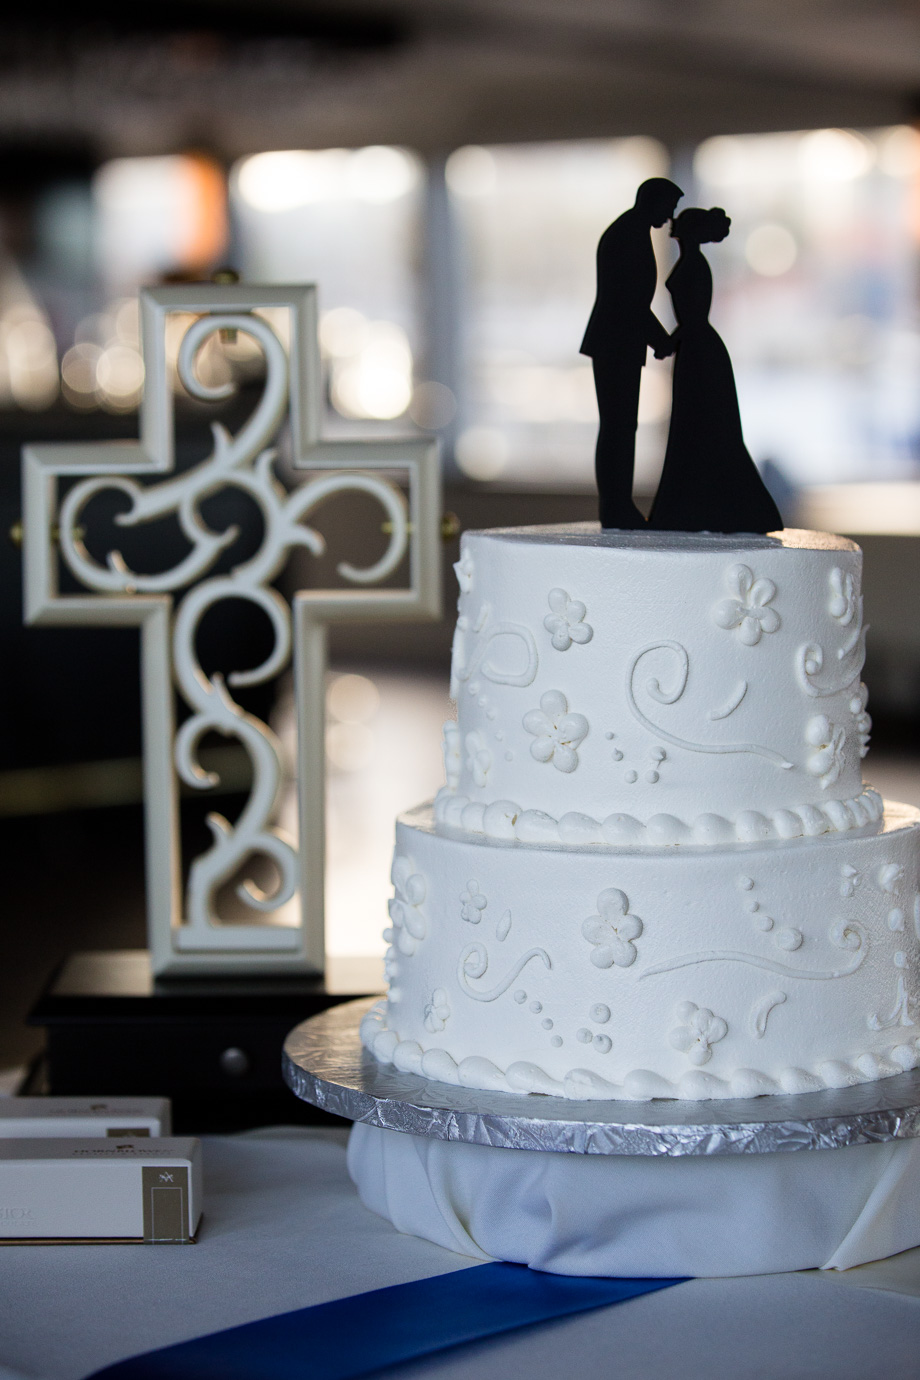 Wedding cake with silhouette cake topper and cross in background